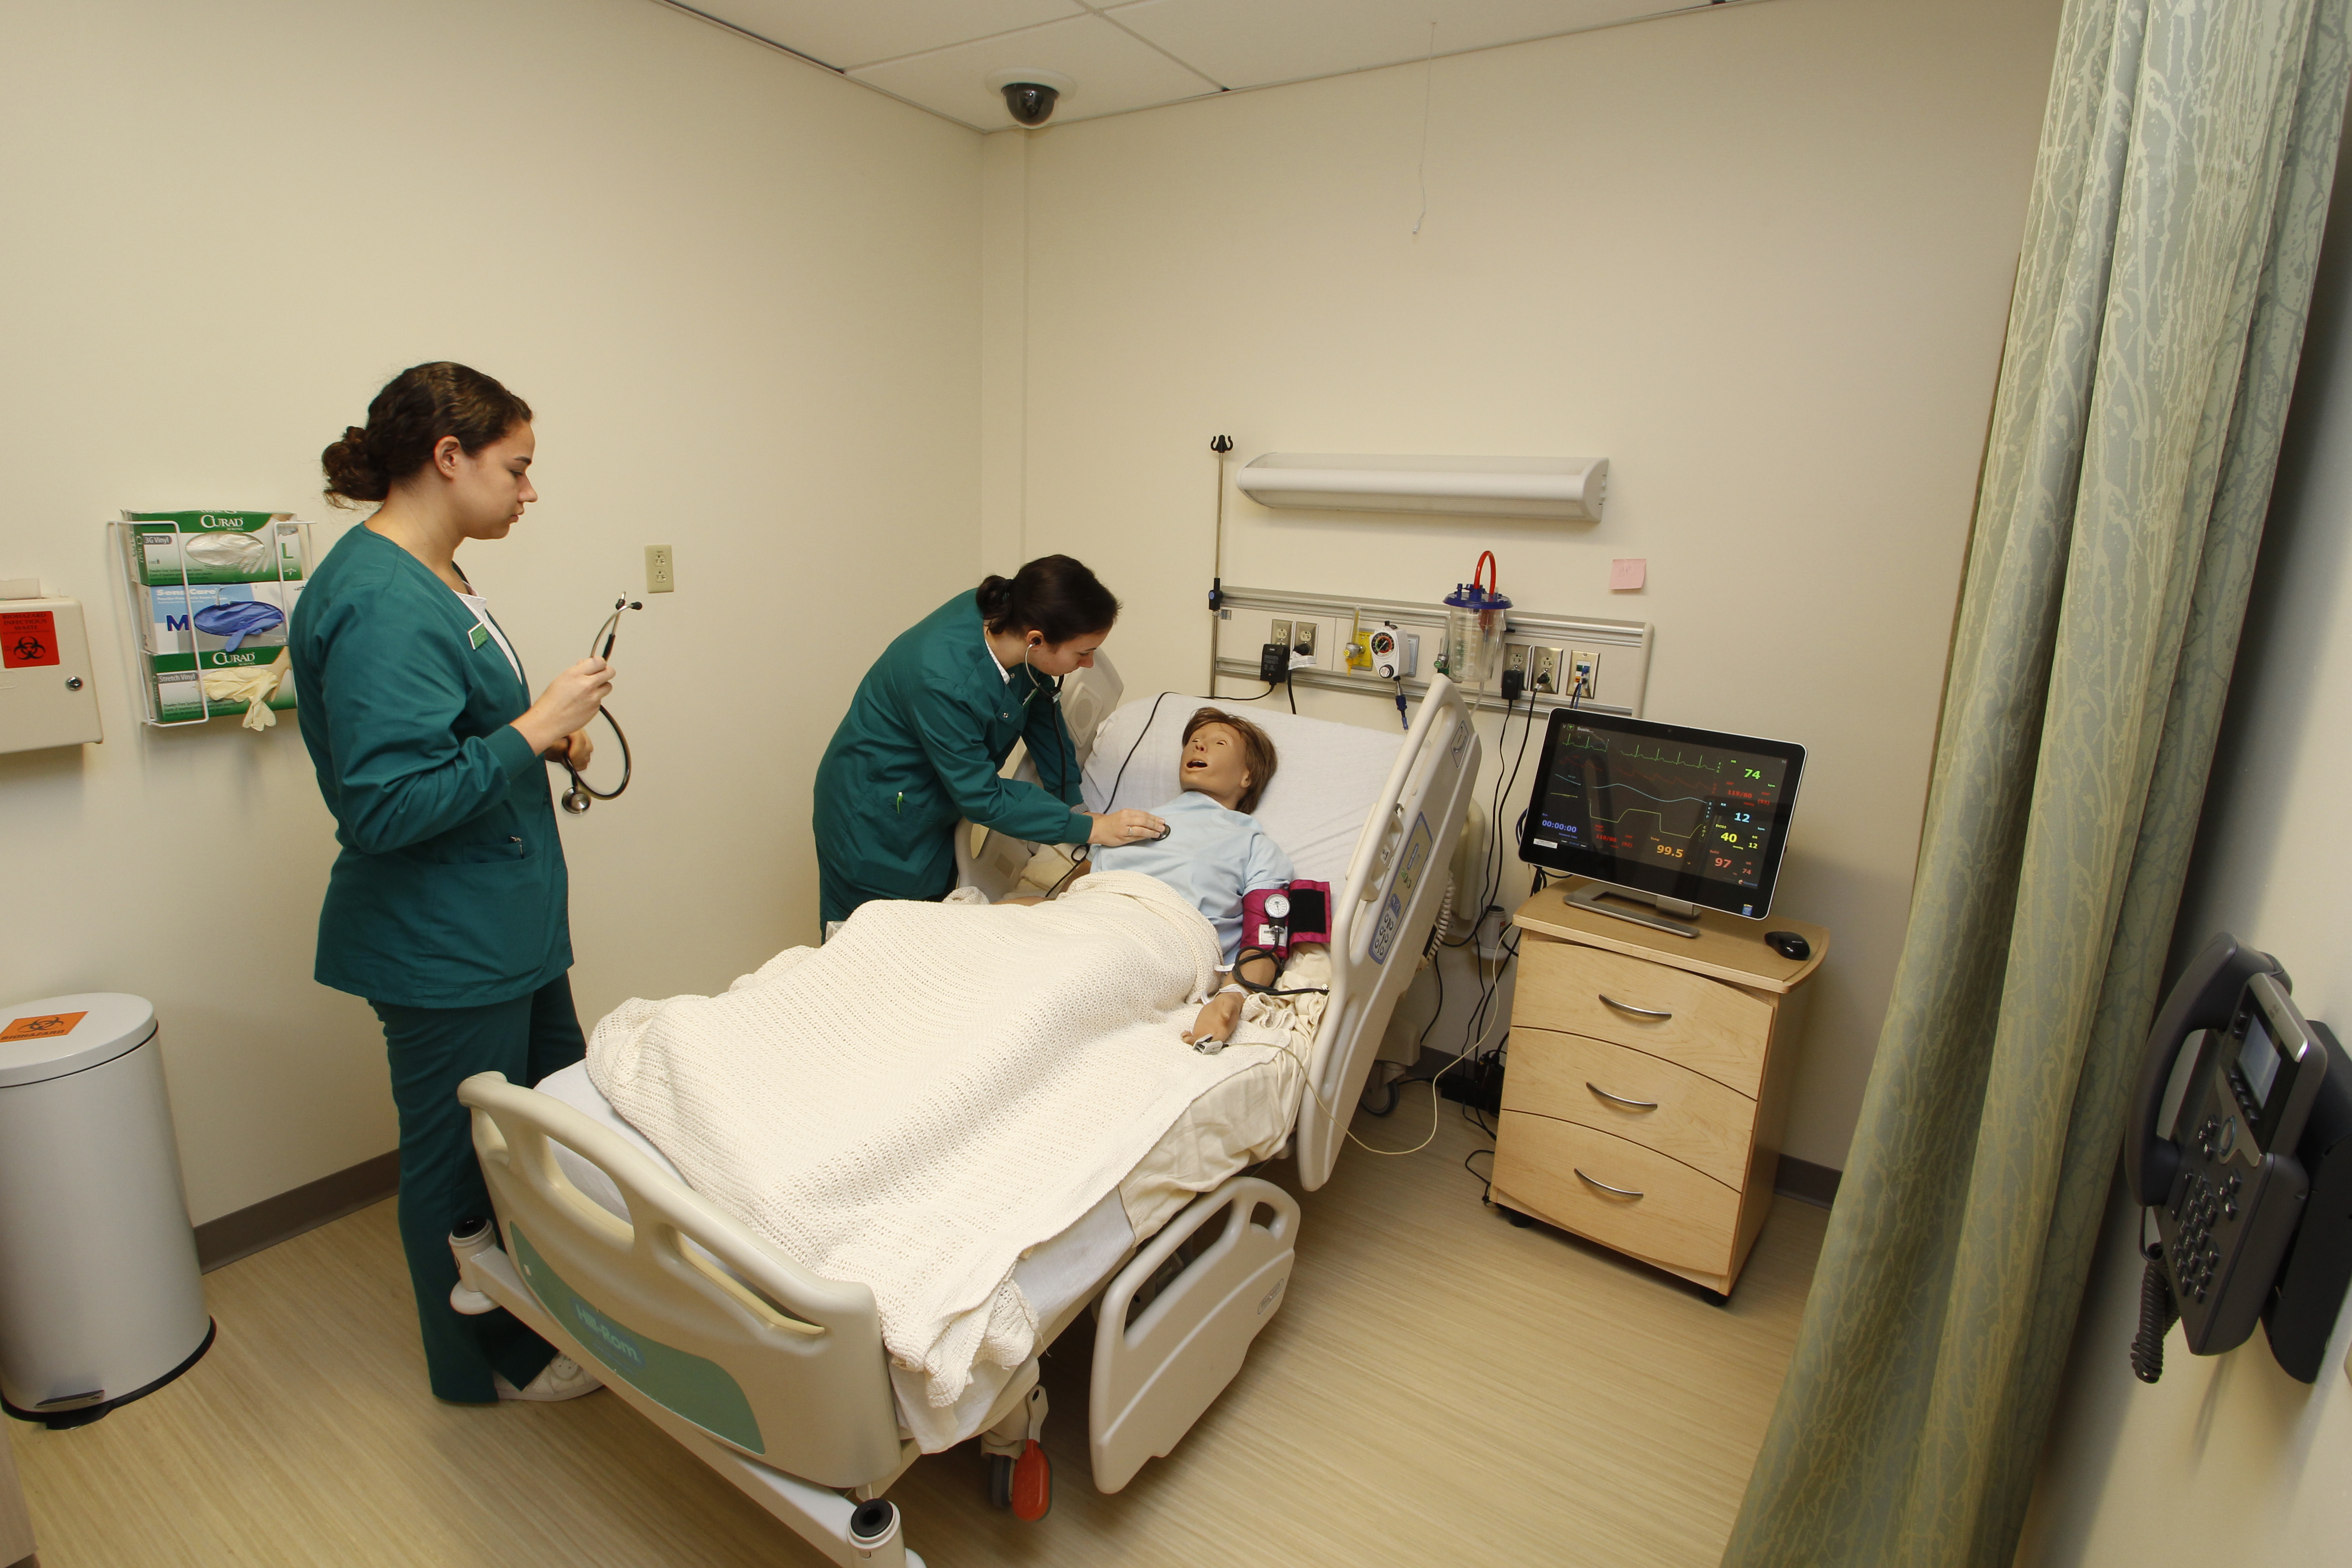 Two medical assistant students practice on a patient simulation